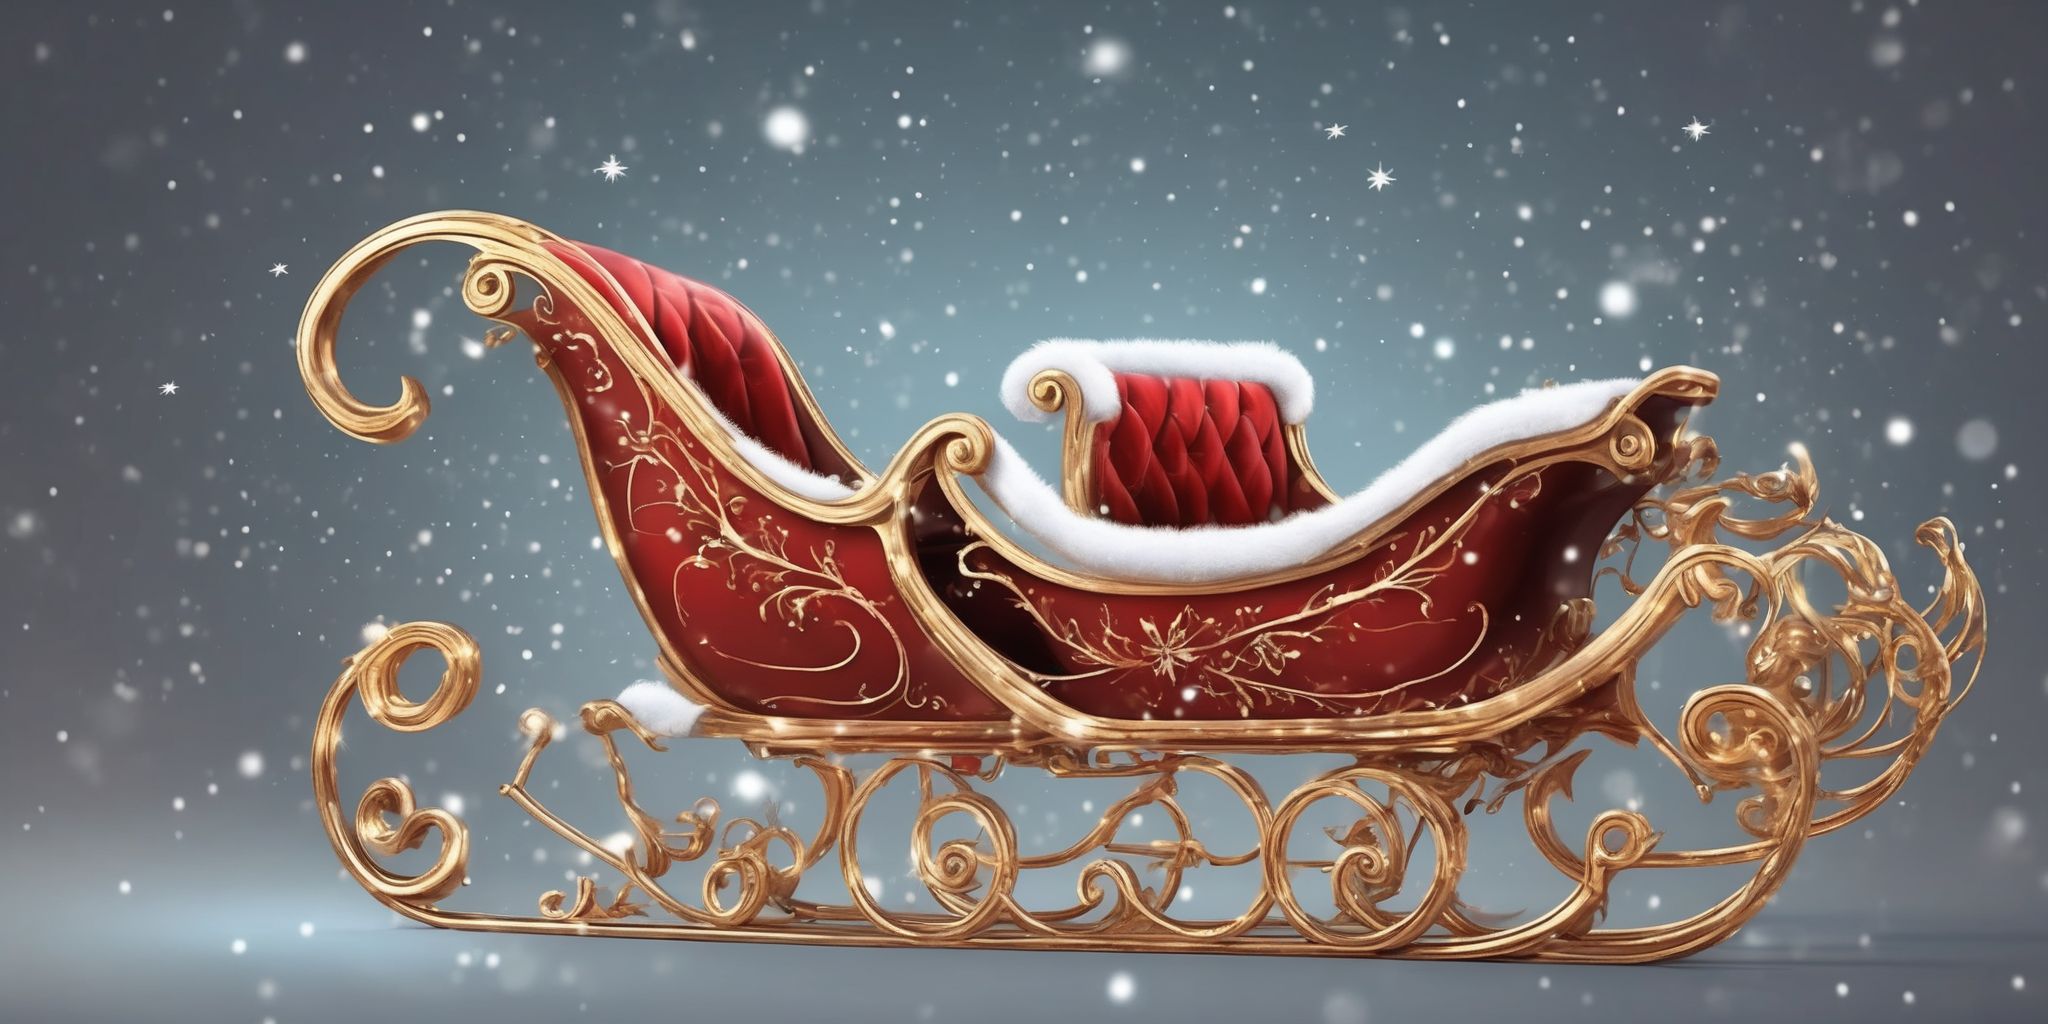 Magical Sleigh in realistic Christmas style